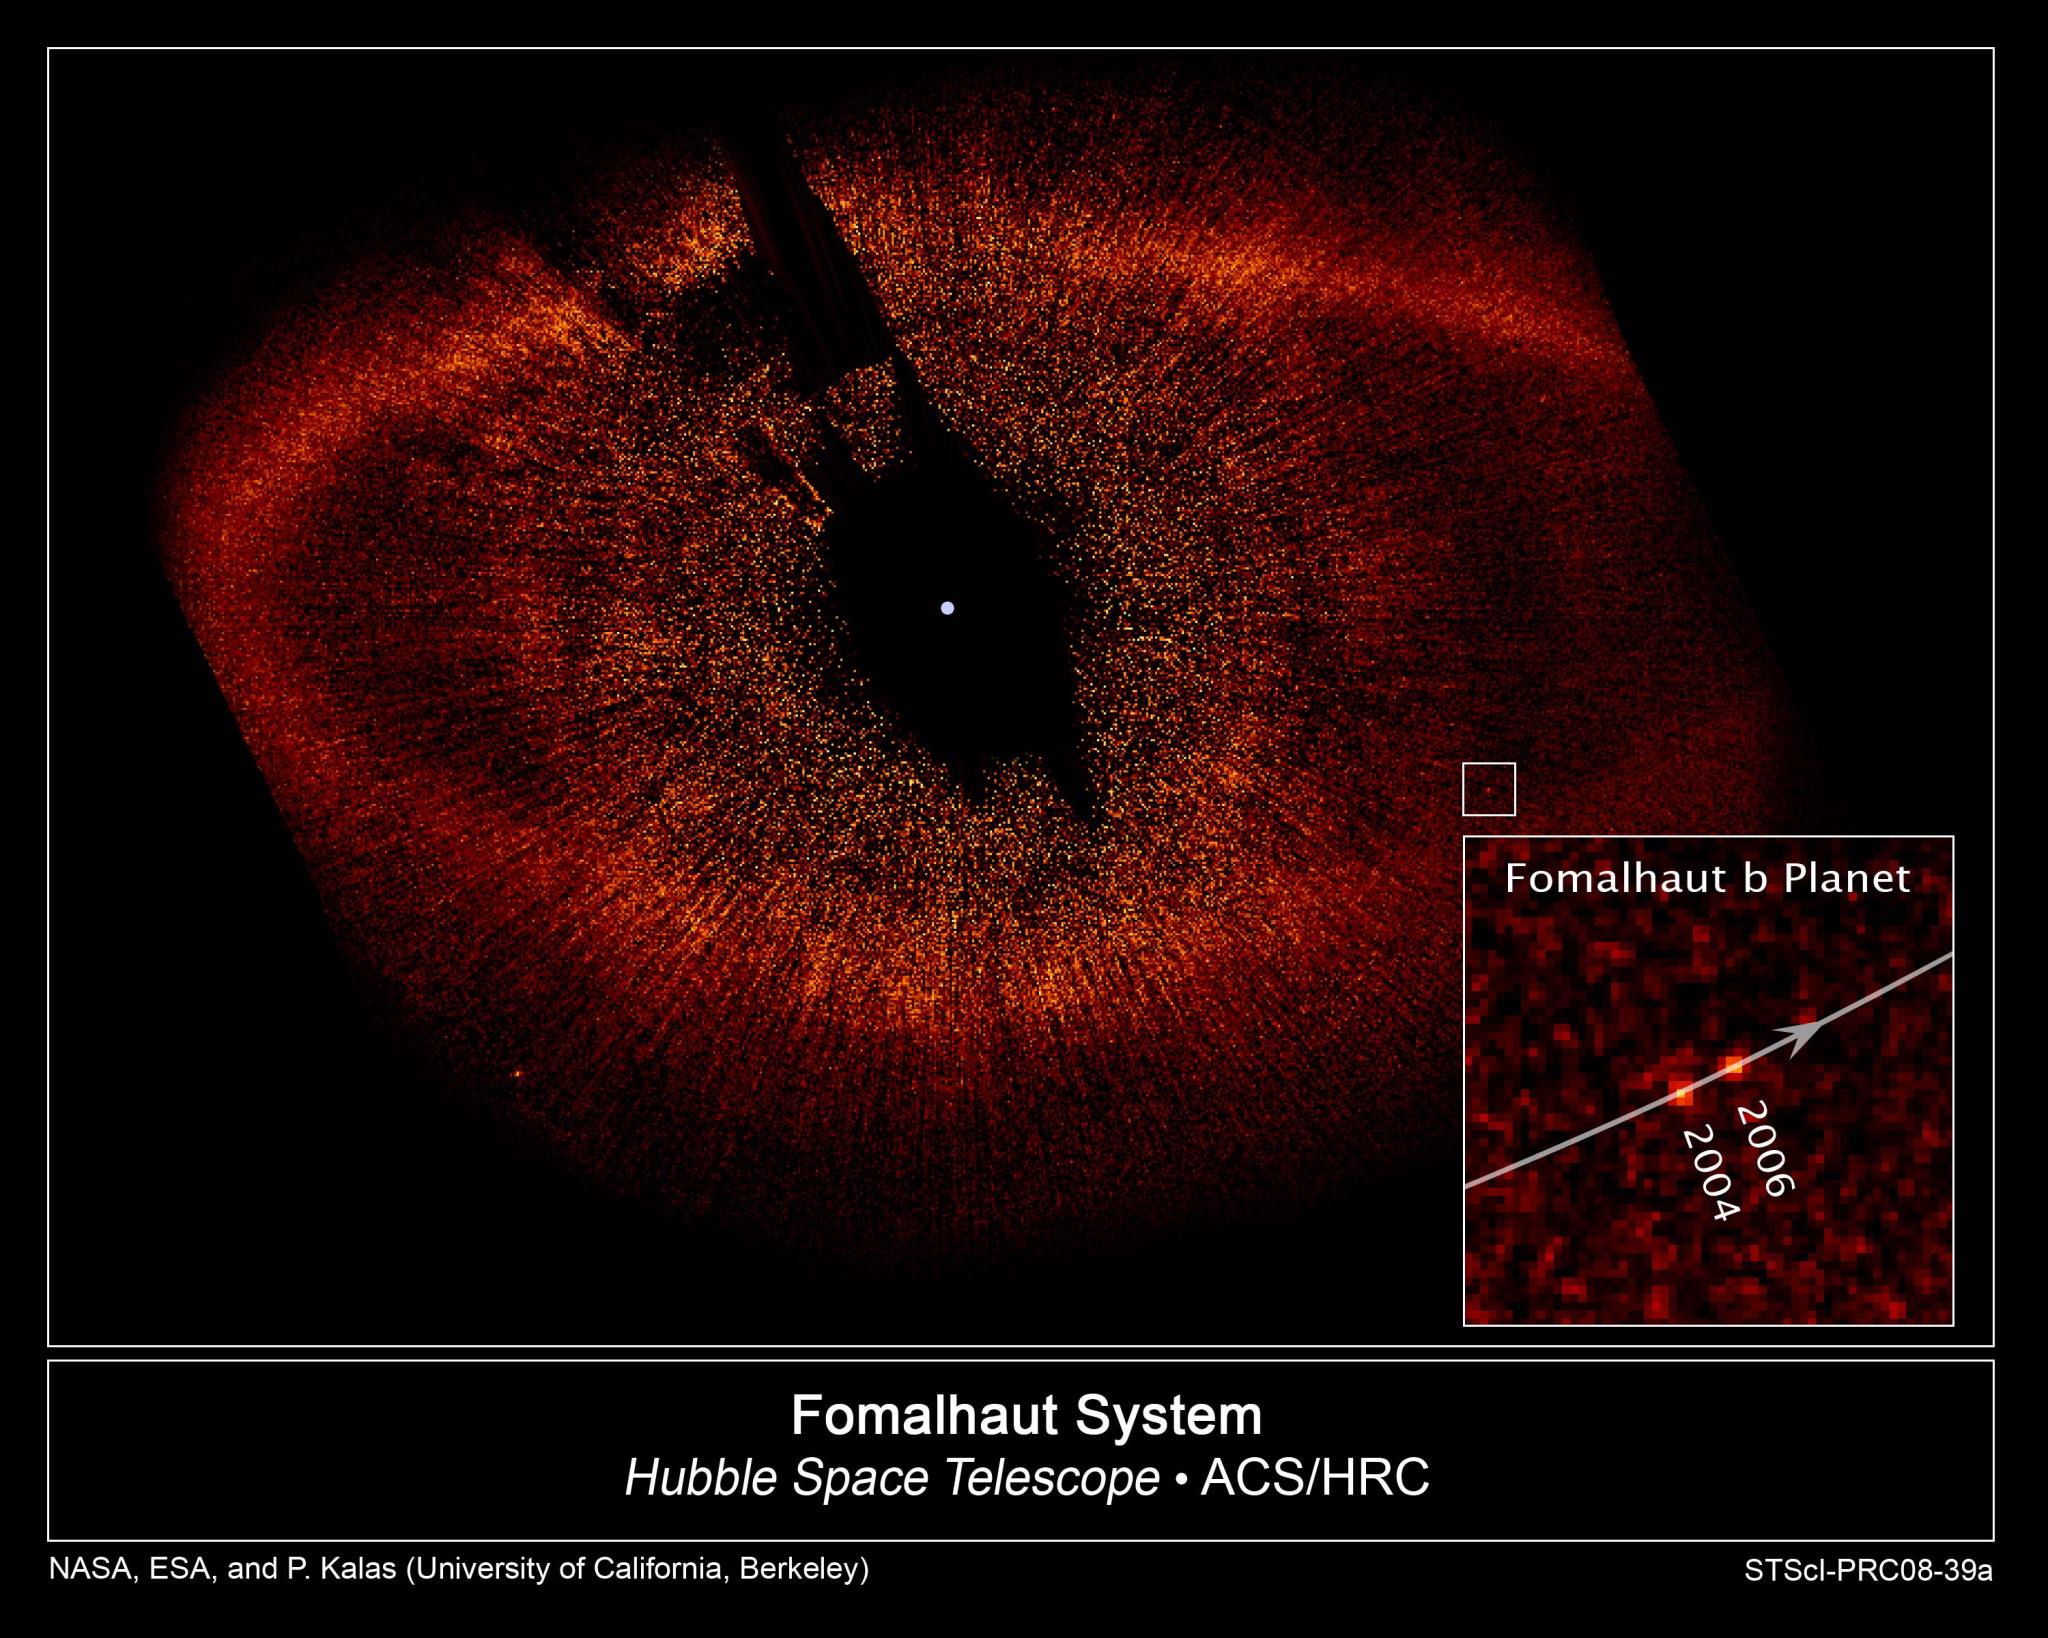 Hubble view of Fomalhault